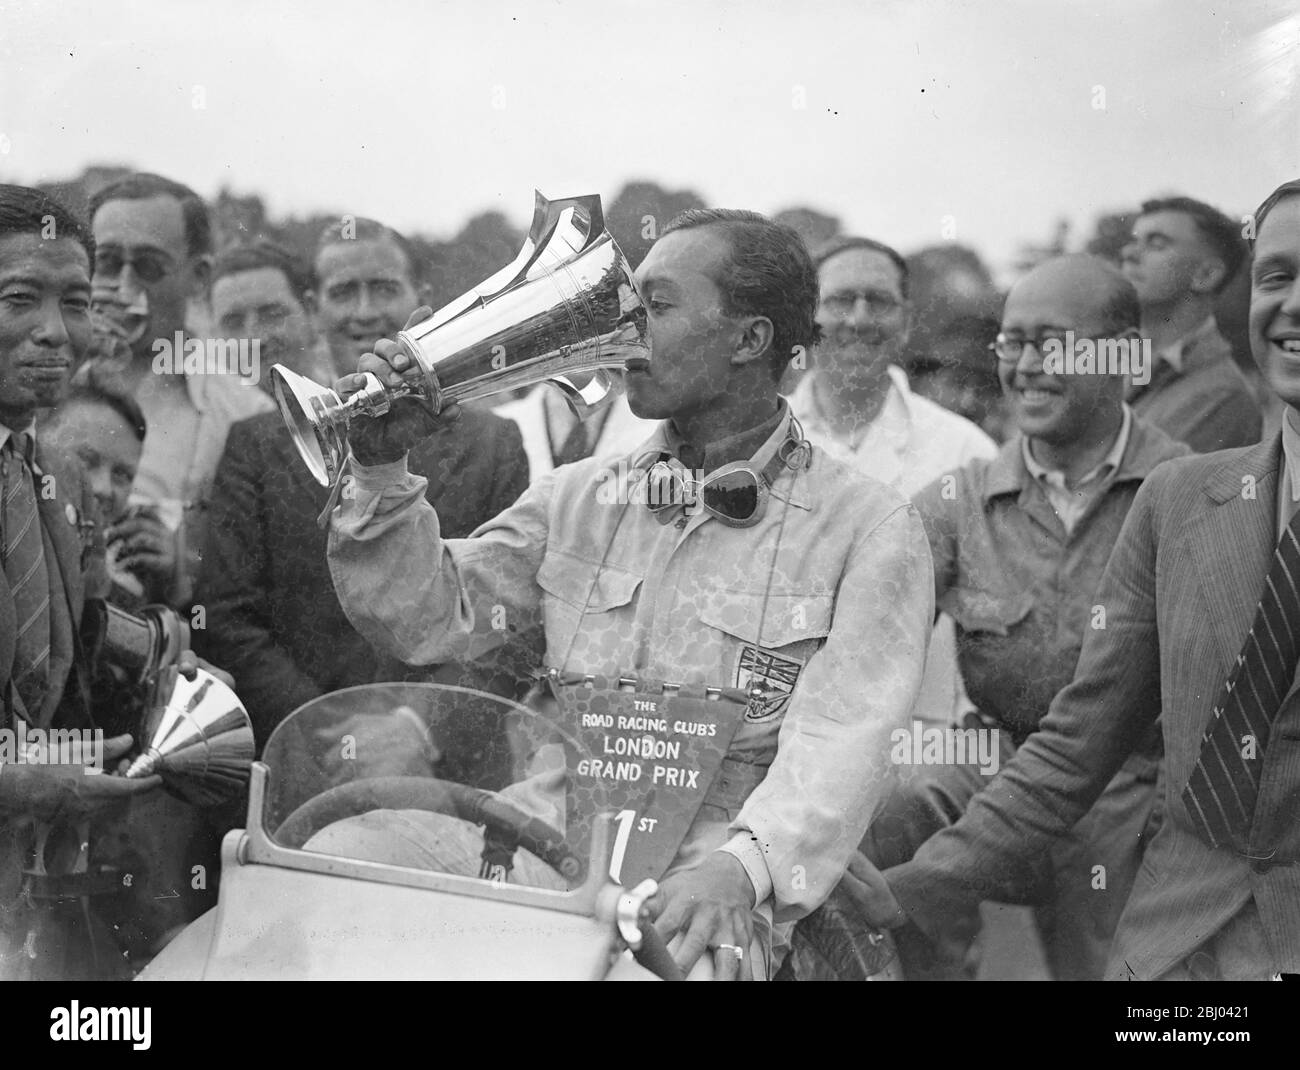 Prince Birabongse of Siam [Prince Bira of Siam / Thailand], driving an ERA [English Racing Automobiles] won the first London Grand Prix on the new Crystal Palace road racing circuit. I. F. Cornell (ERA) was second and P. Maclure (Riley) was third. Prince Birabongse drinking out of the Cup after his victory. - 17 July 1937 Stock Photo